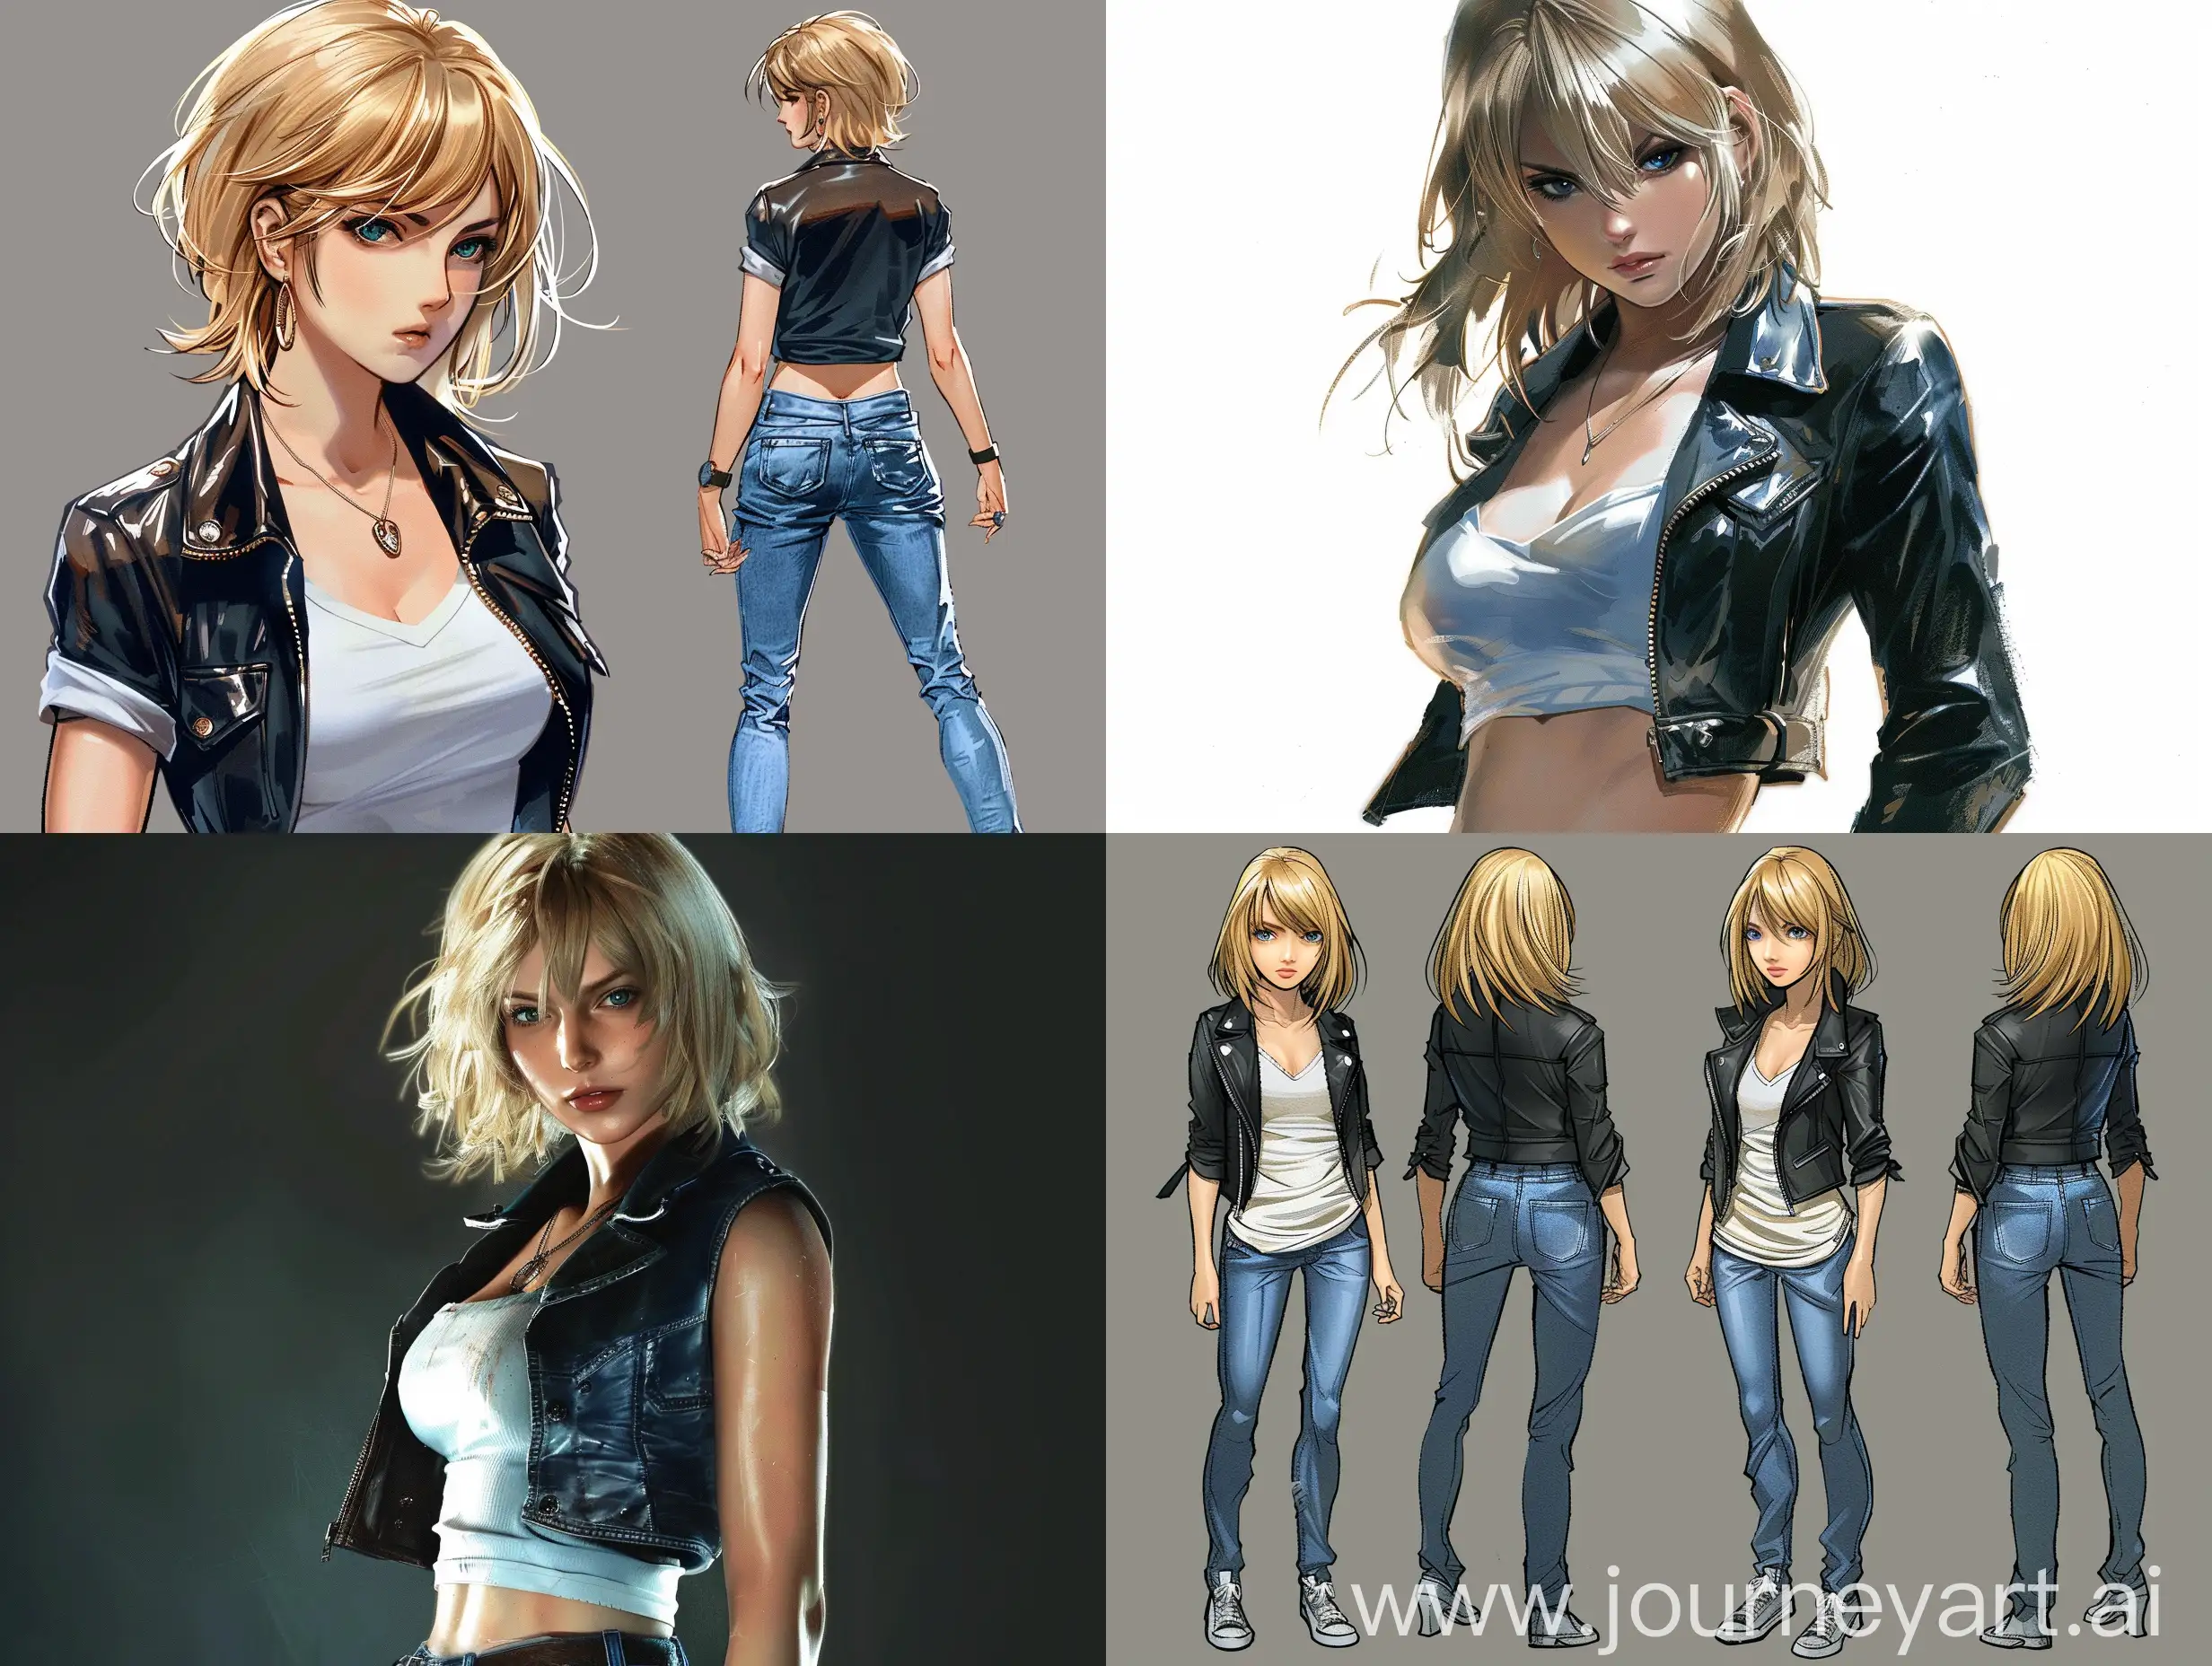 Aya Brea, parasite eve, the 3rd Birthday, video game character, shoulder-length blonde short hair with side bangs. The character's eyes are blue, giving her a sharp and focused gaze. No shadows NYPD Uniform •Consists of a plain white short-sleeved t-shirt and blue jeans. •Aya also wears a black leather jacket over the shirt.